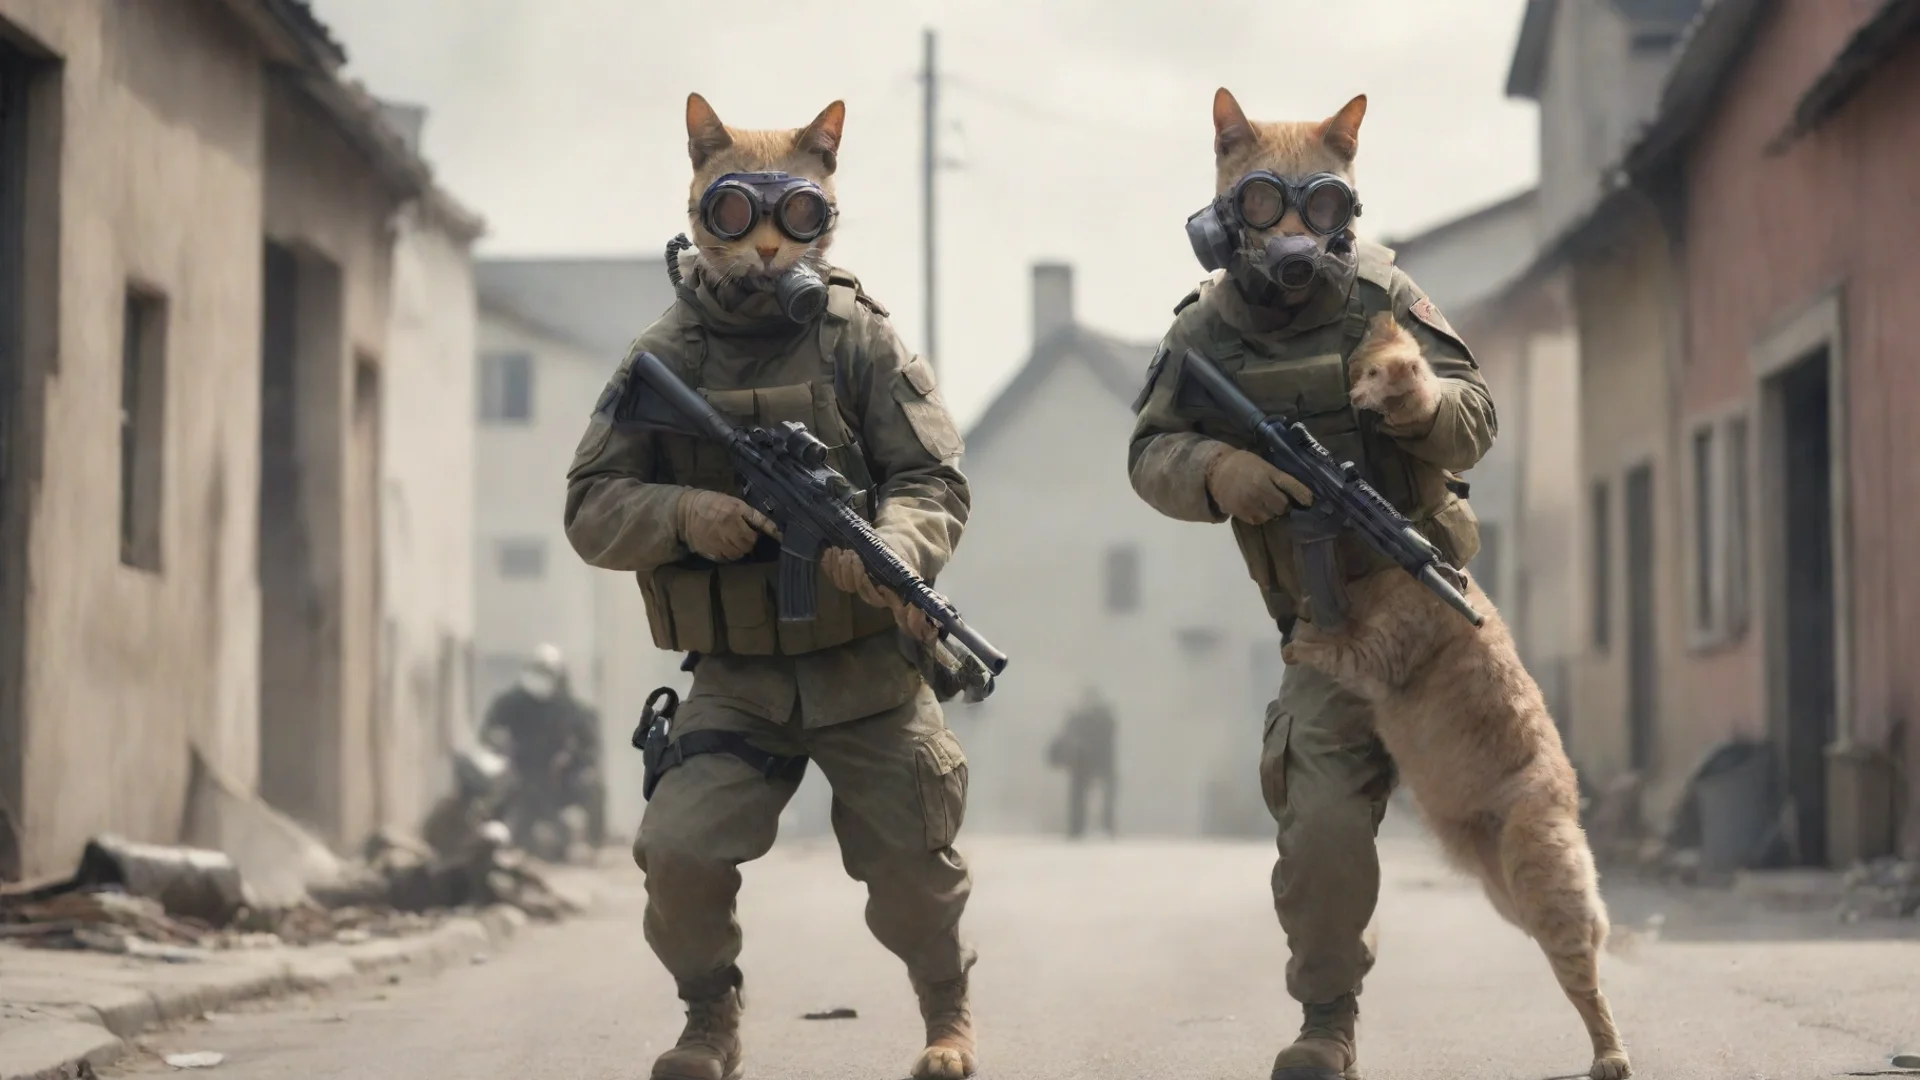 amazing cat soldier with gas mask shooting dog soldier in a small town awesome portrait 2 wide